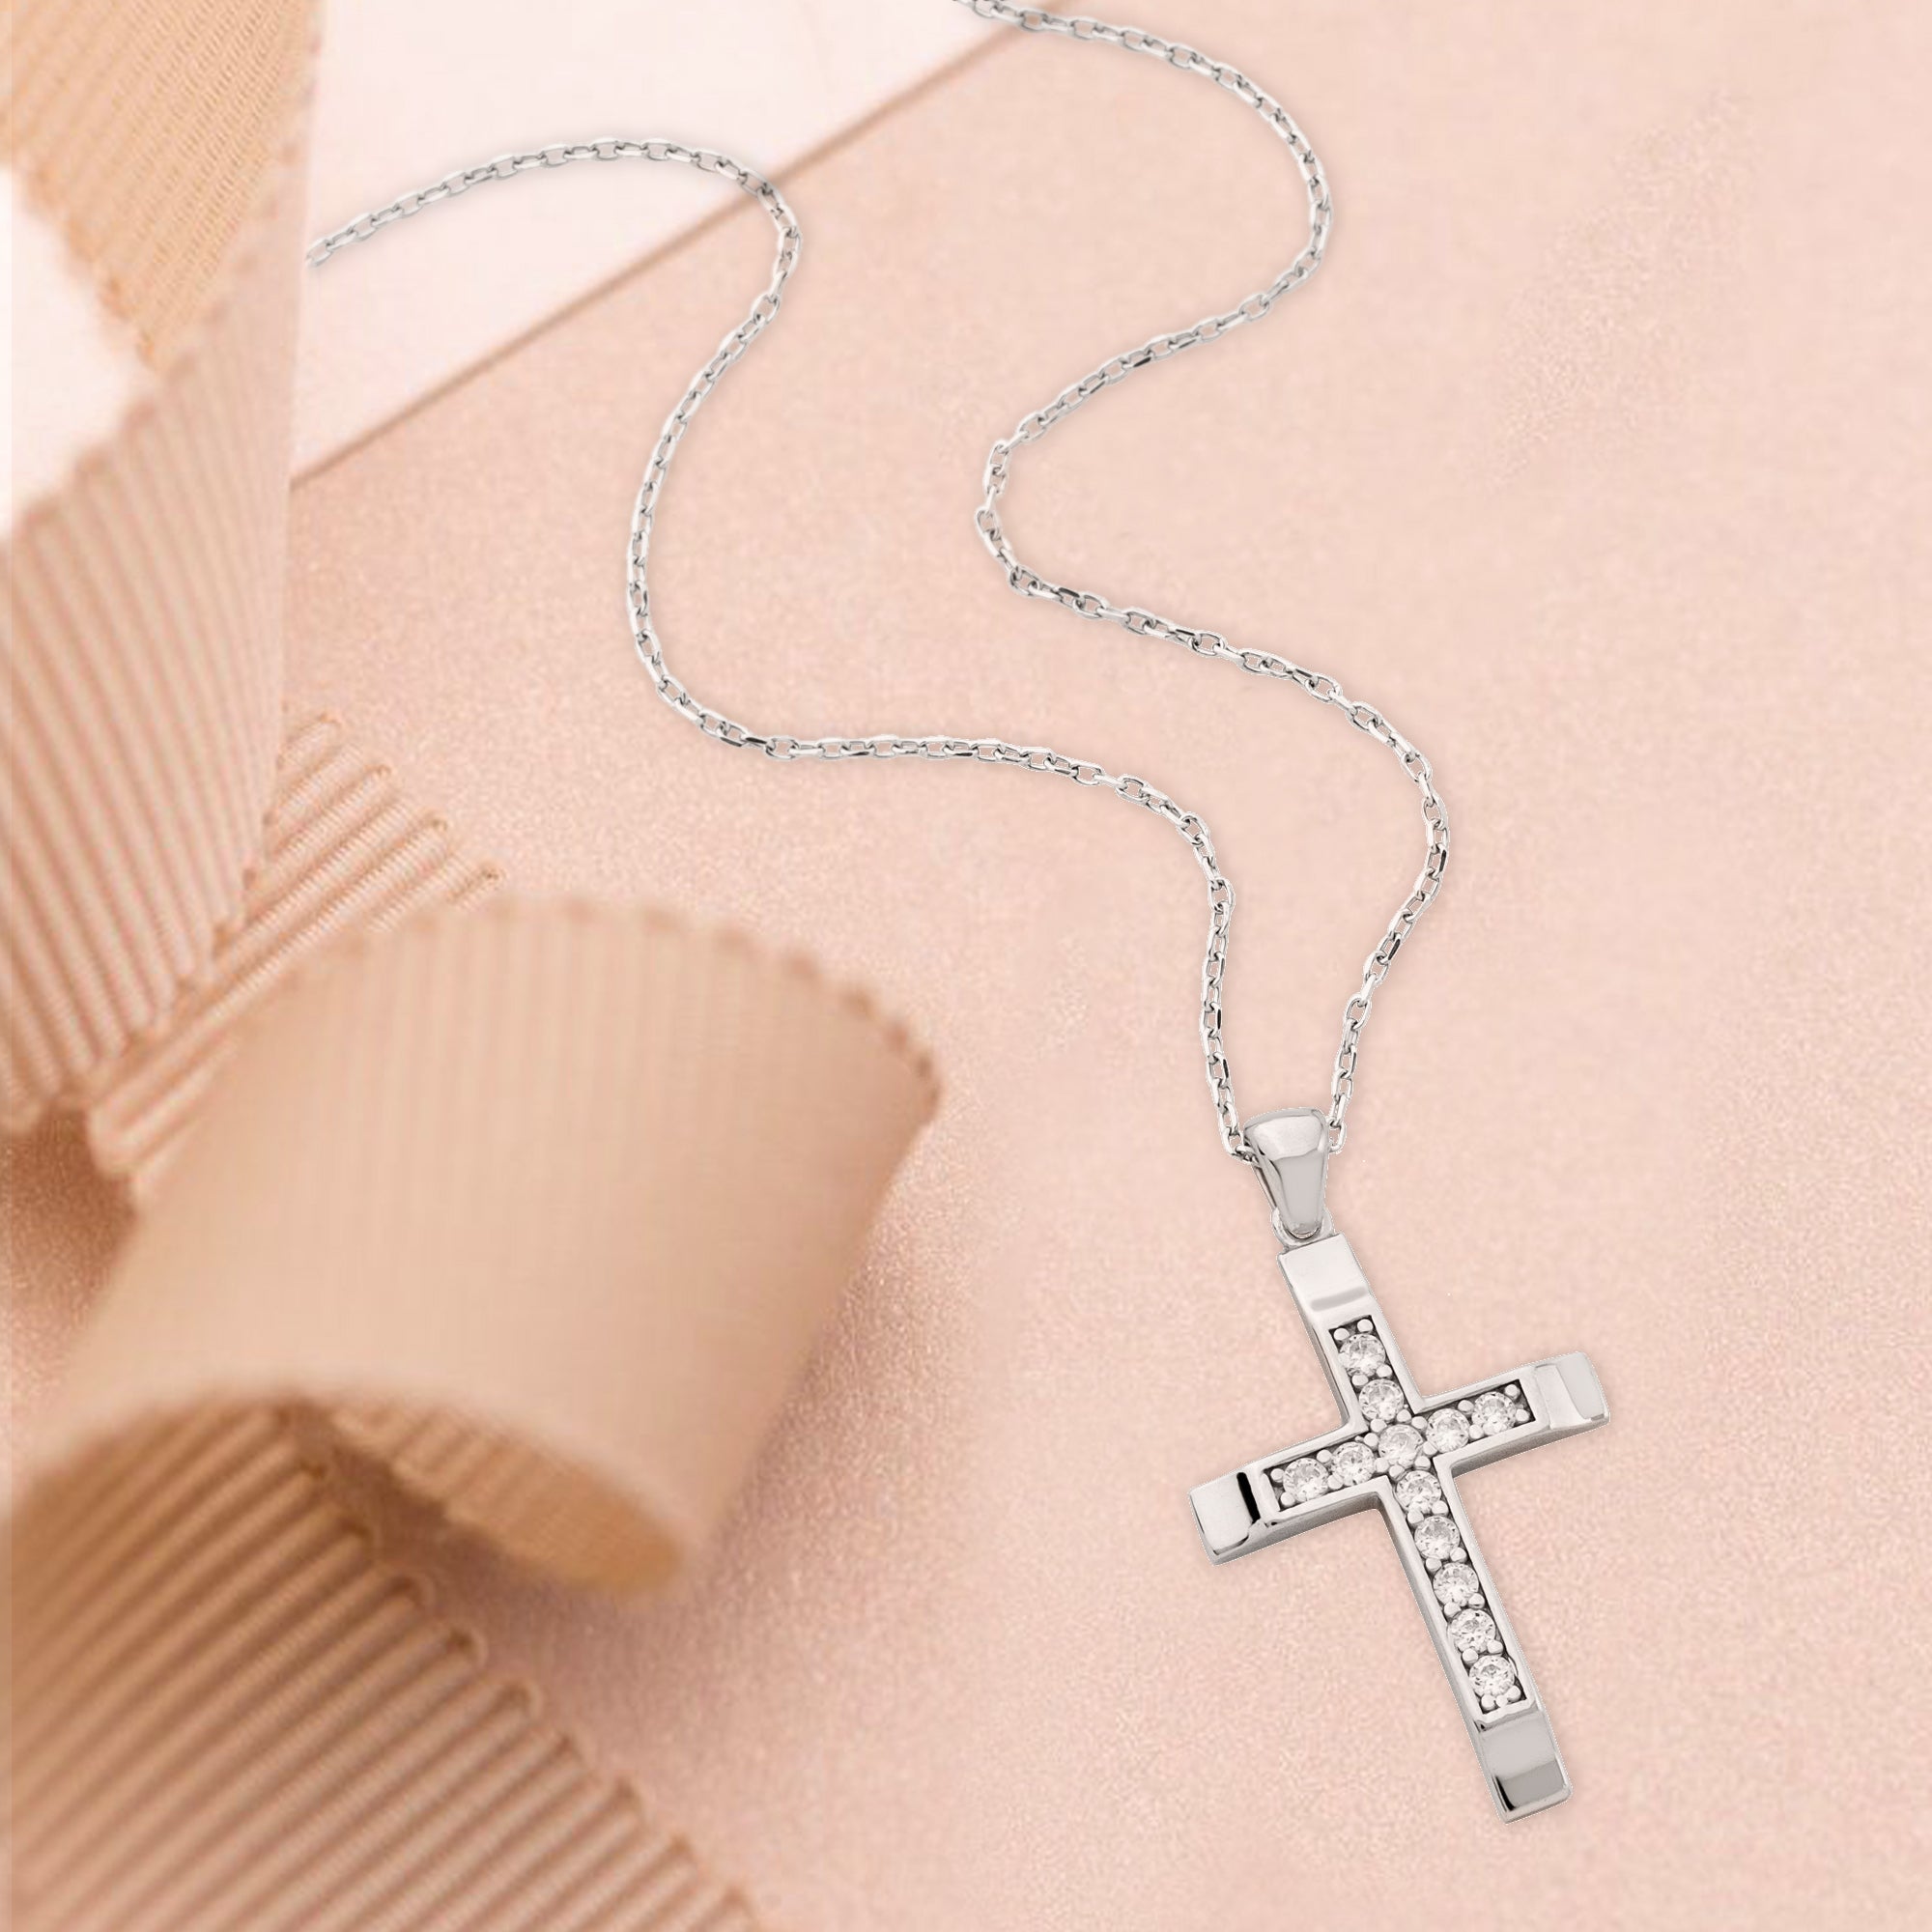 Raised Center Cross with CZ Accents